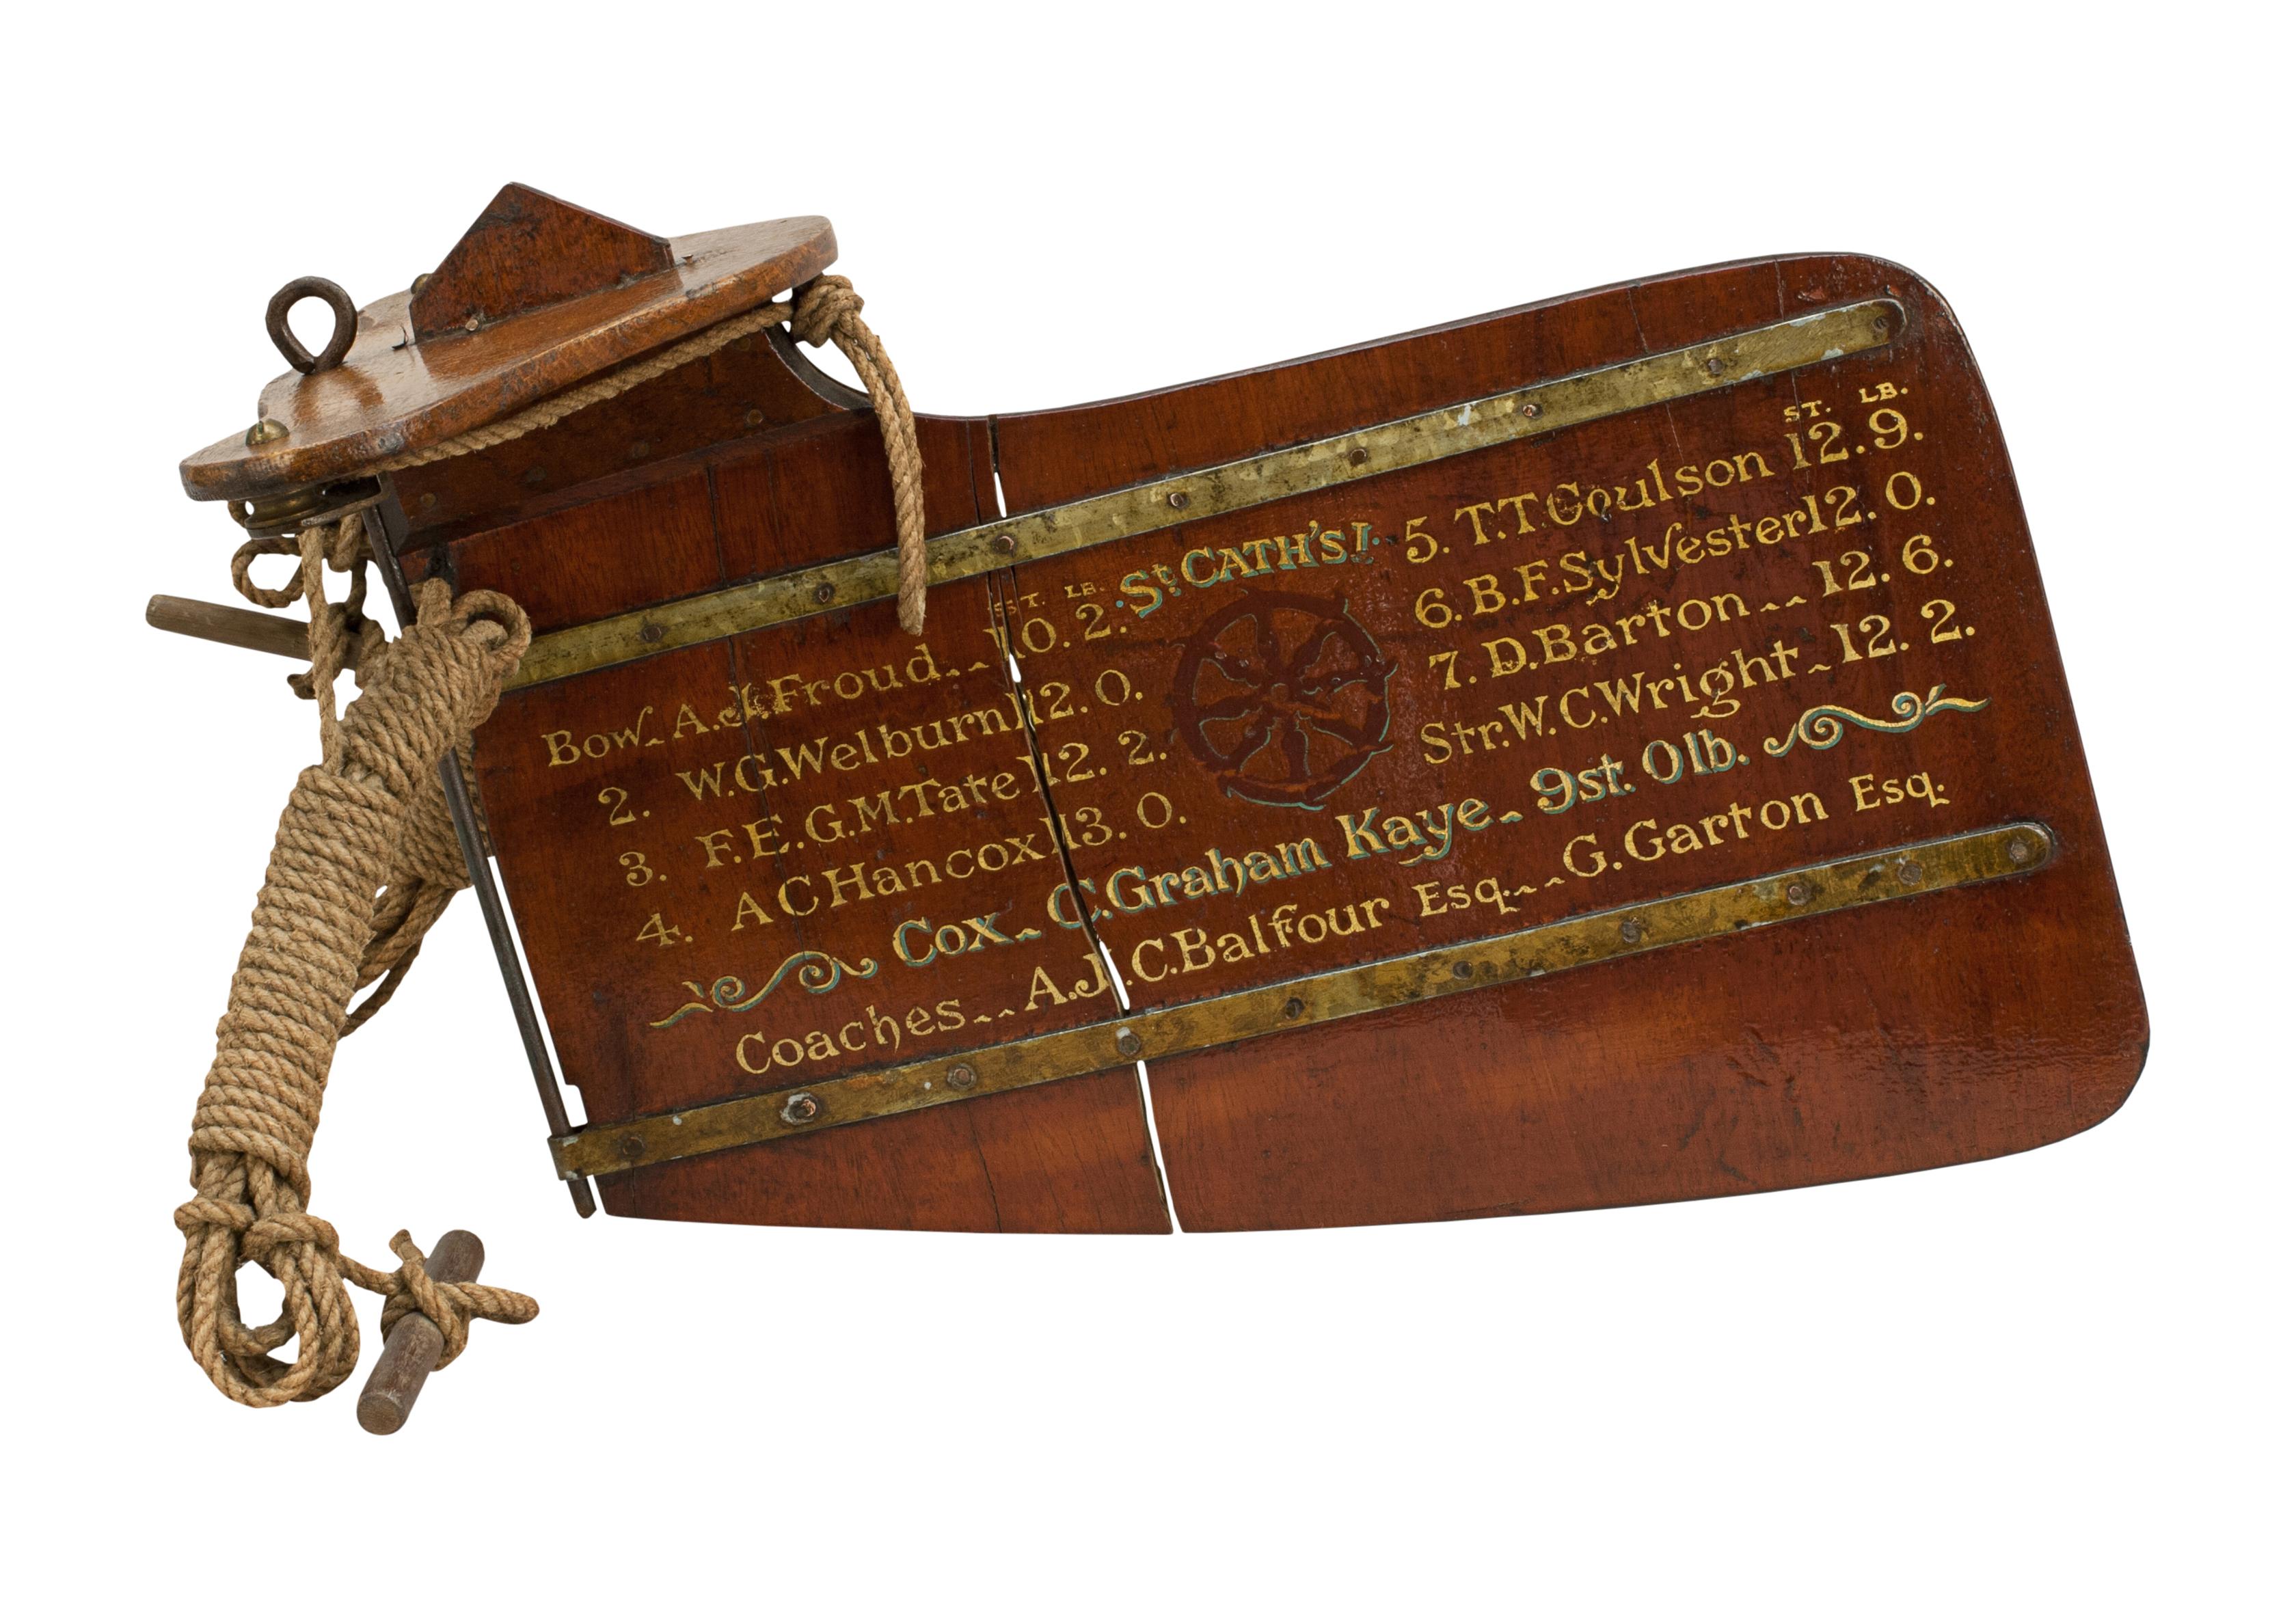 St Catharine's College commemorative rudder.
An original Oxford University presentation trophy rudder 'St Catharine's Boat Club, Torpids 1950' with gold calligraphy and college insignia. The rudder comes with the corresponding team photograph by